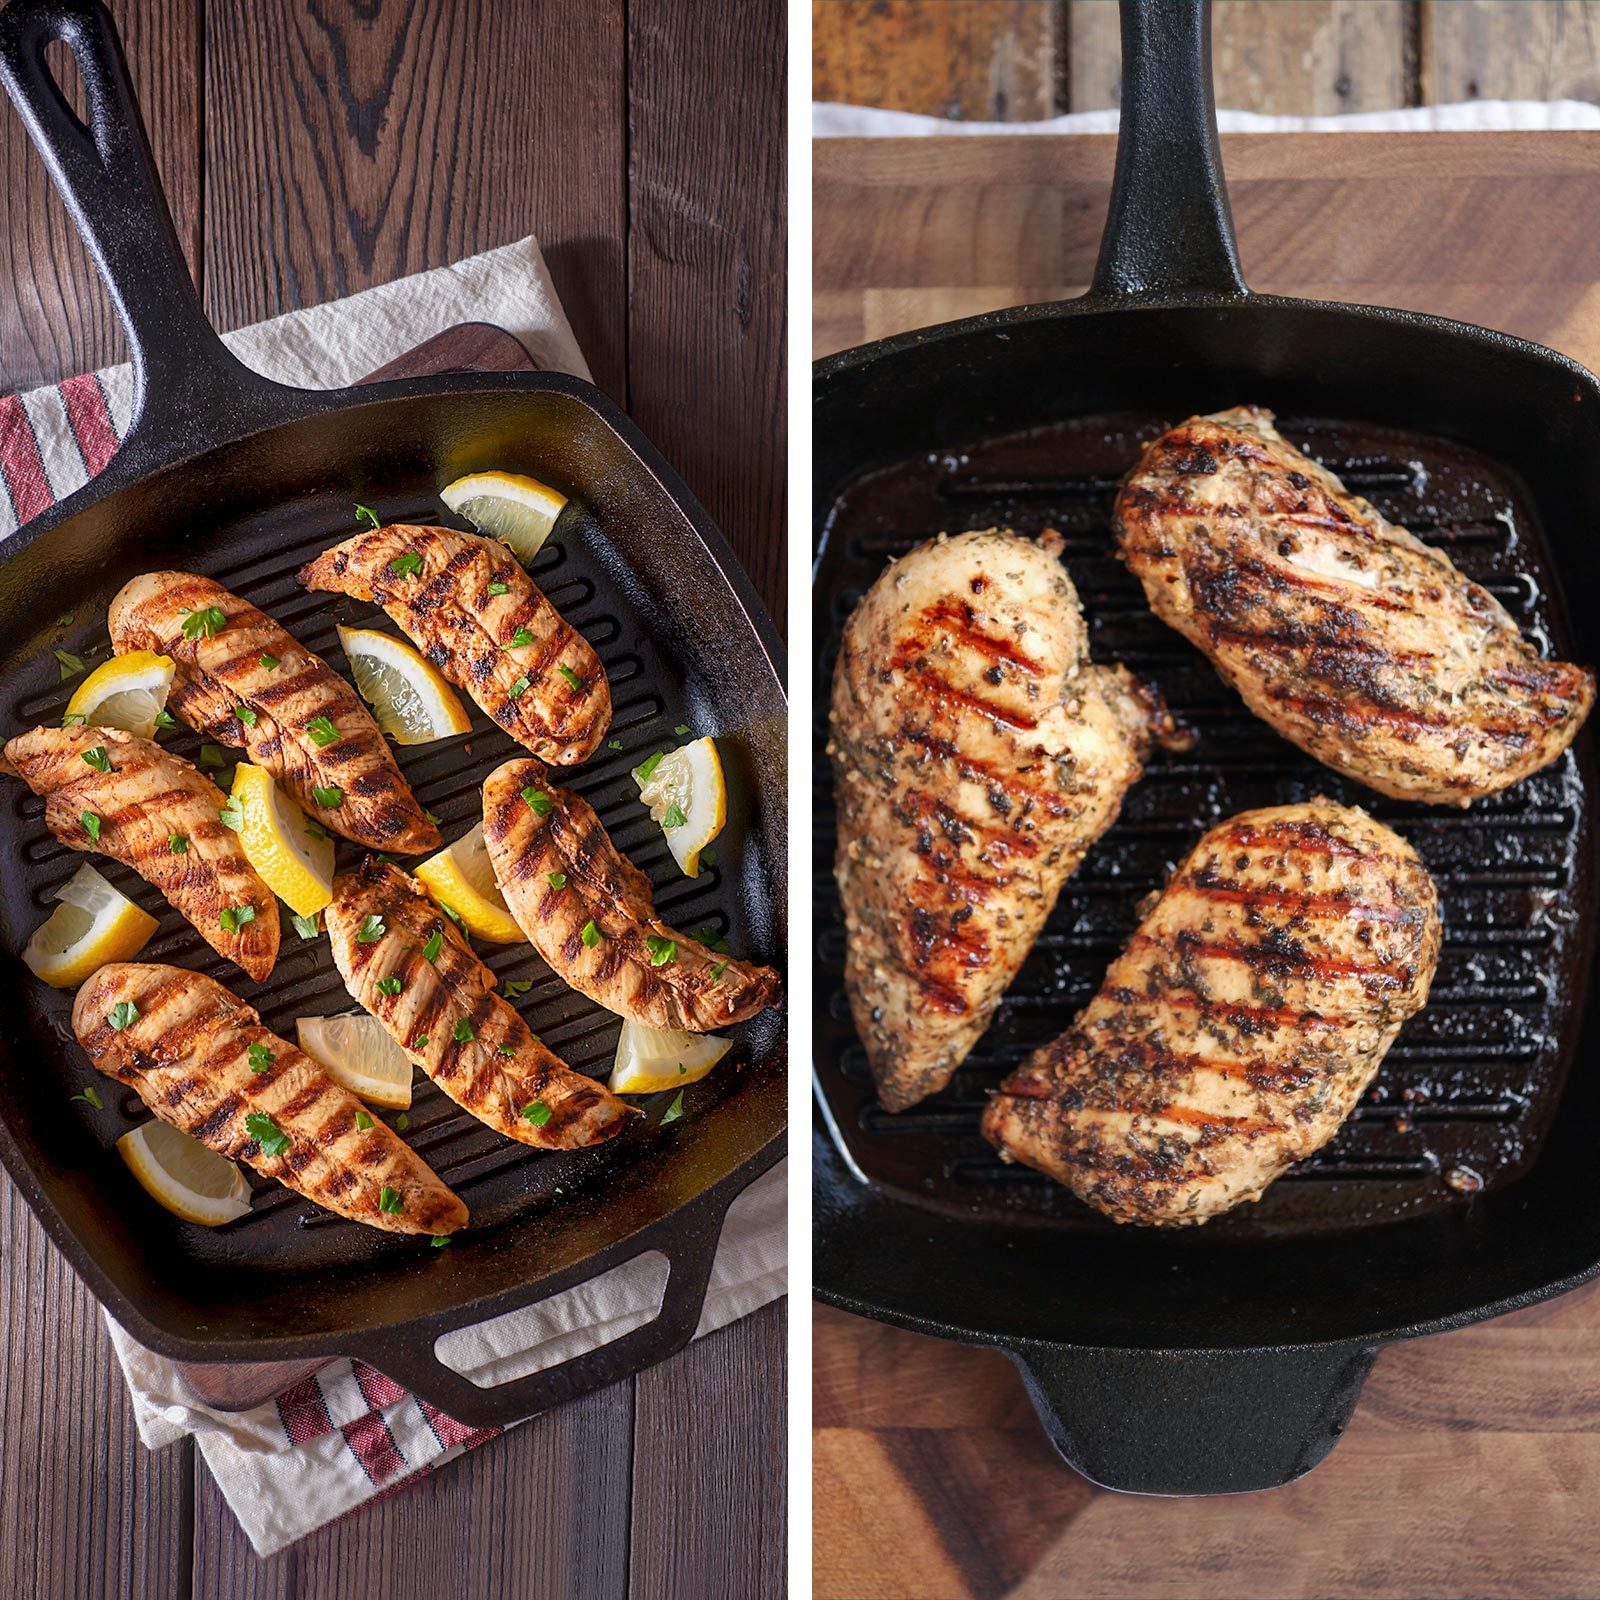 Chicken Tenderloin Vs. Breast What's The Difference